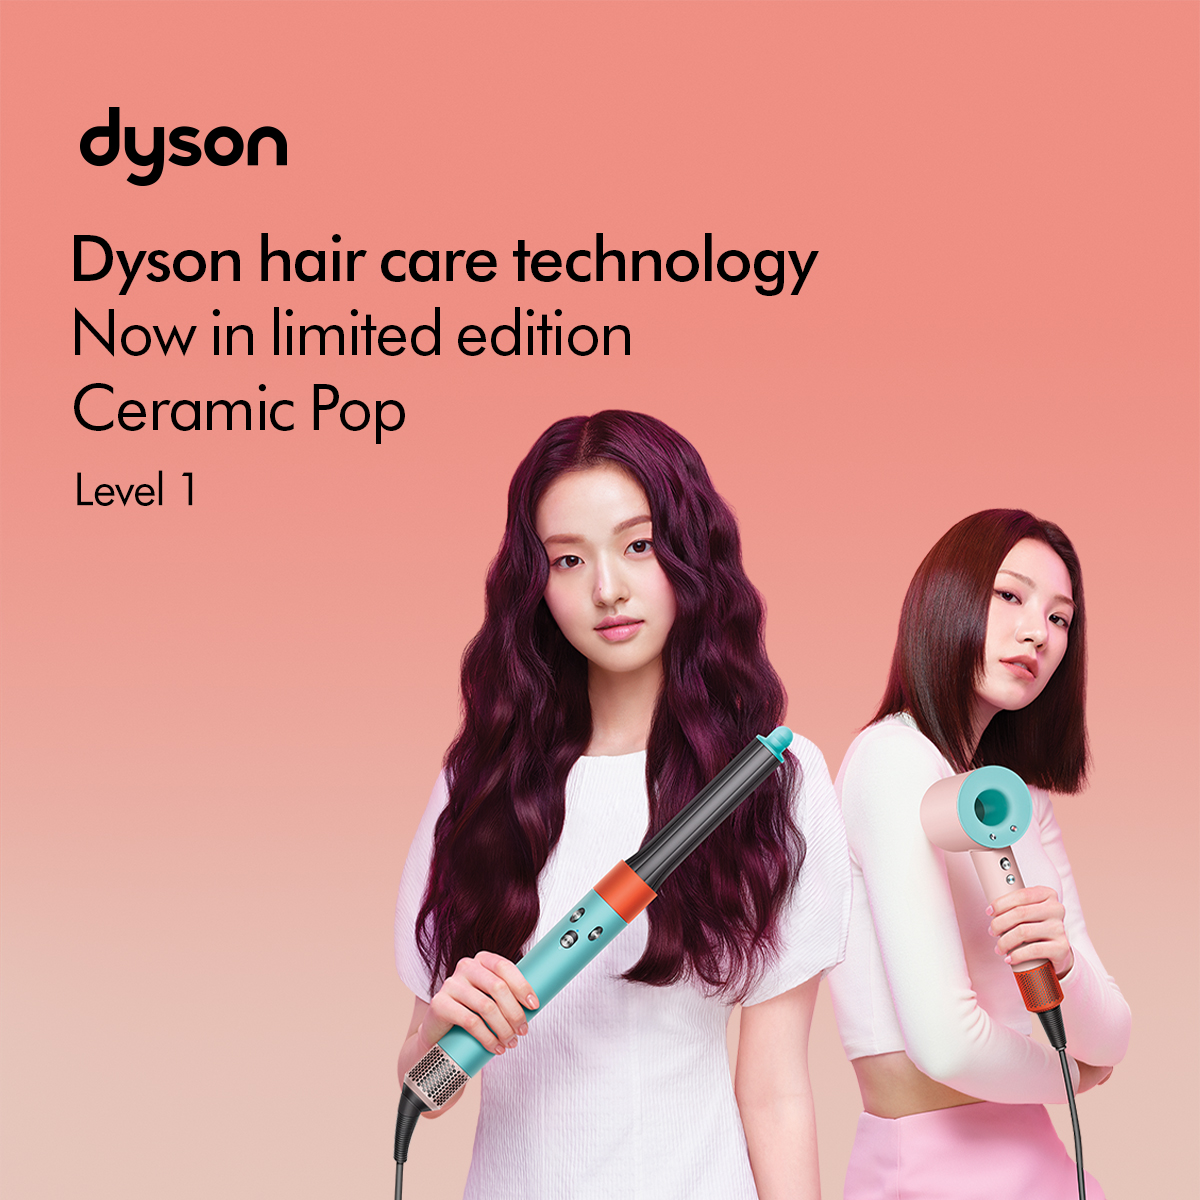 🎉CERAMIC POP - EXPRESS YOUR UNIQUE STYLE WITH DYSON! 🎉